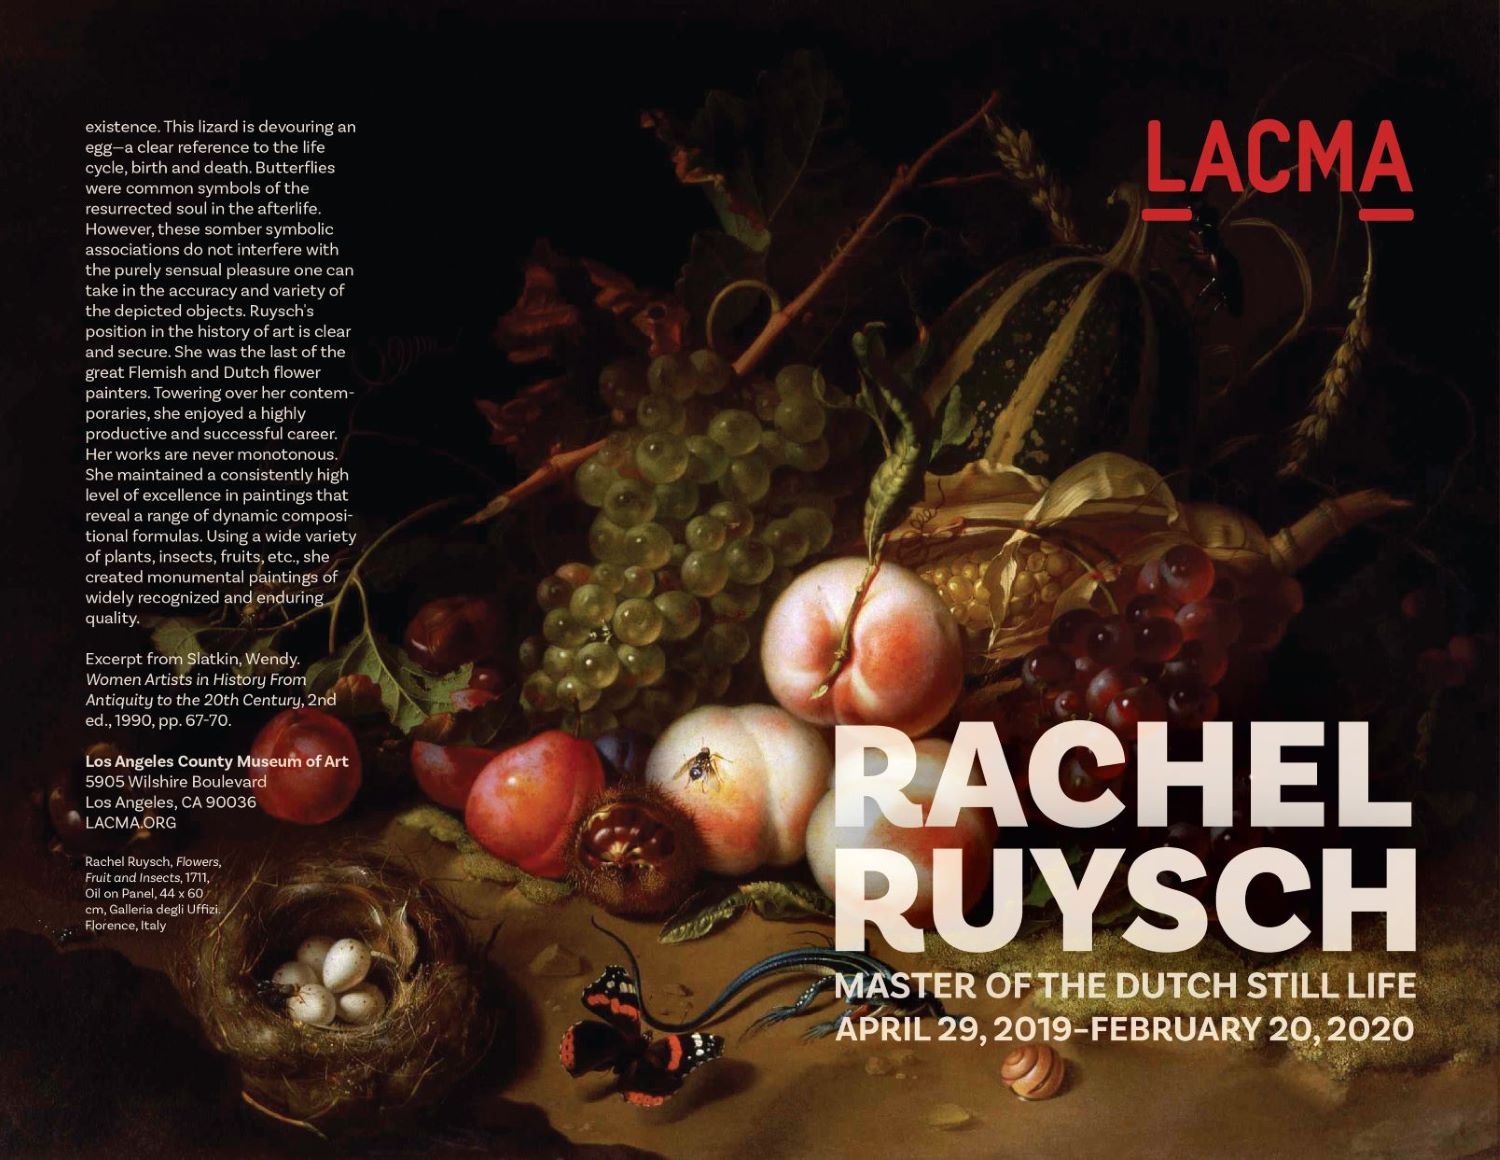 Cover pages of Rachel Ruysch pamphlet with full image of Flowers, Fruit, and Insects